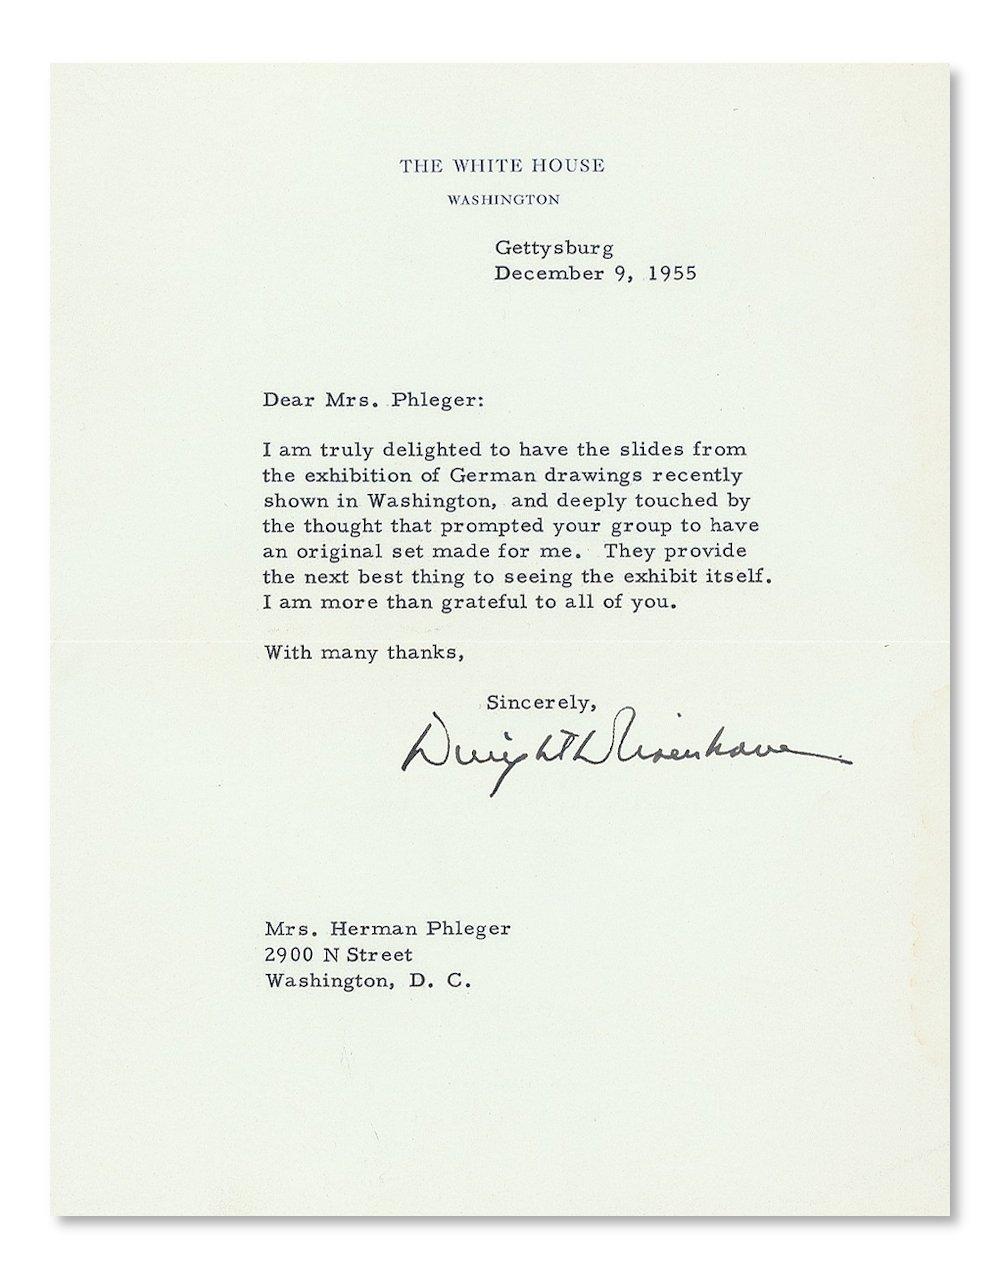 Paper Dwight and Mamie Eisenhower Typed Signed Letters